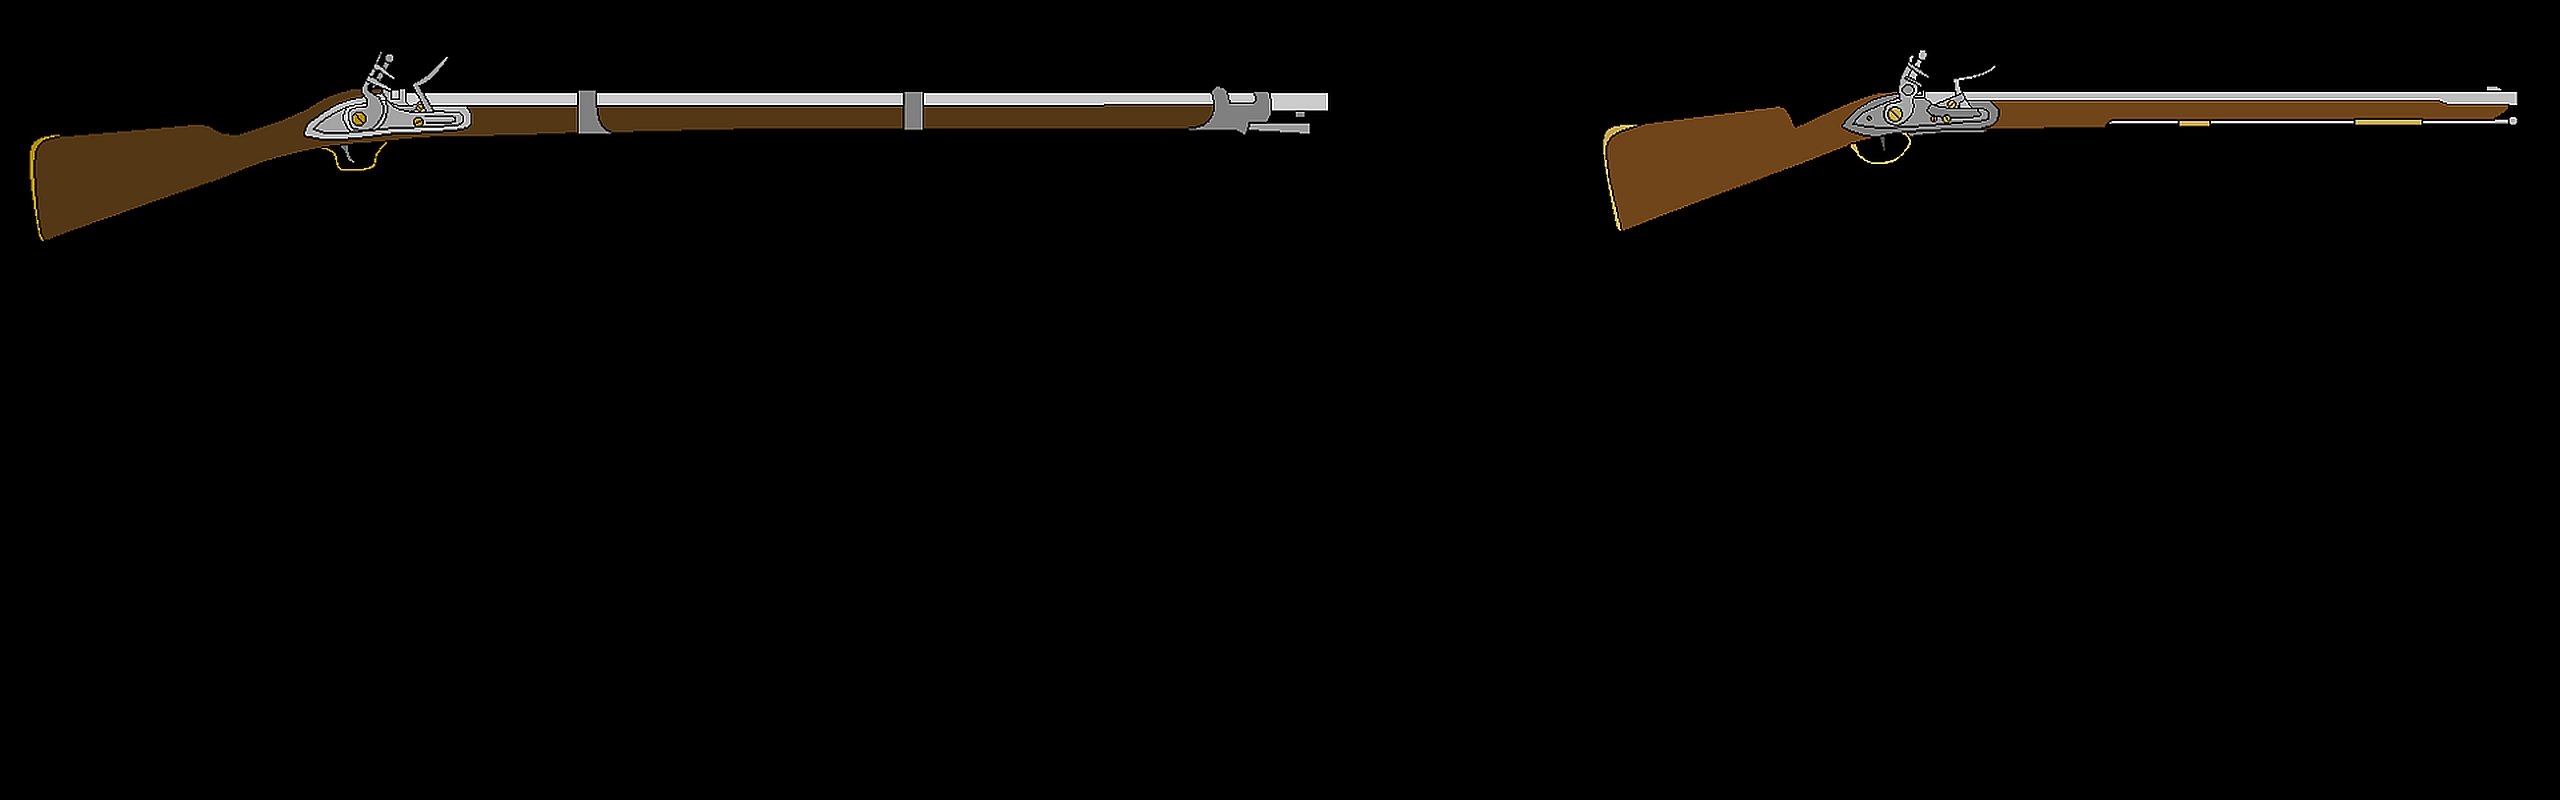 High resolution Rifle dual monitor 2560x800 wallpaper ID:33218 for PC